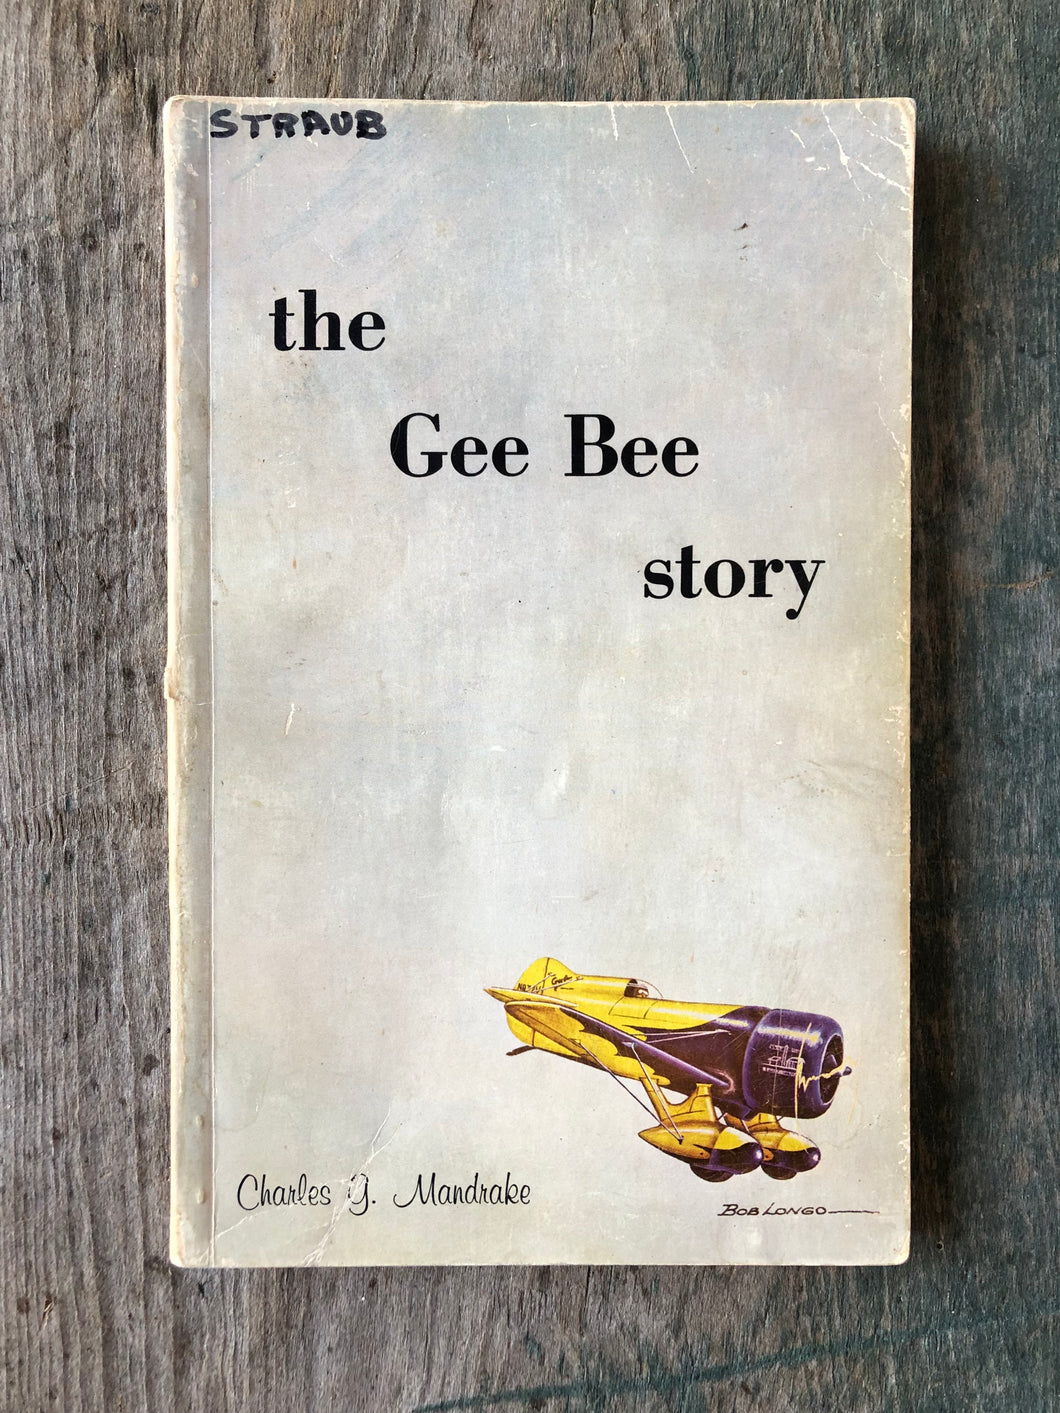 The Gee Bee Story by Charles G. Mandrake